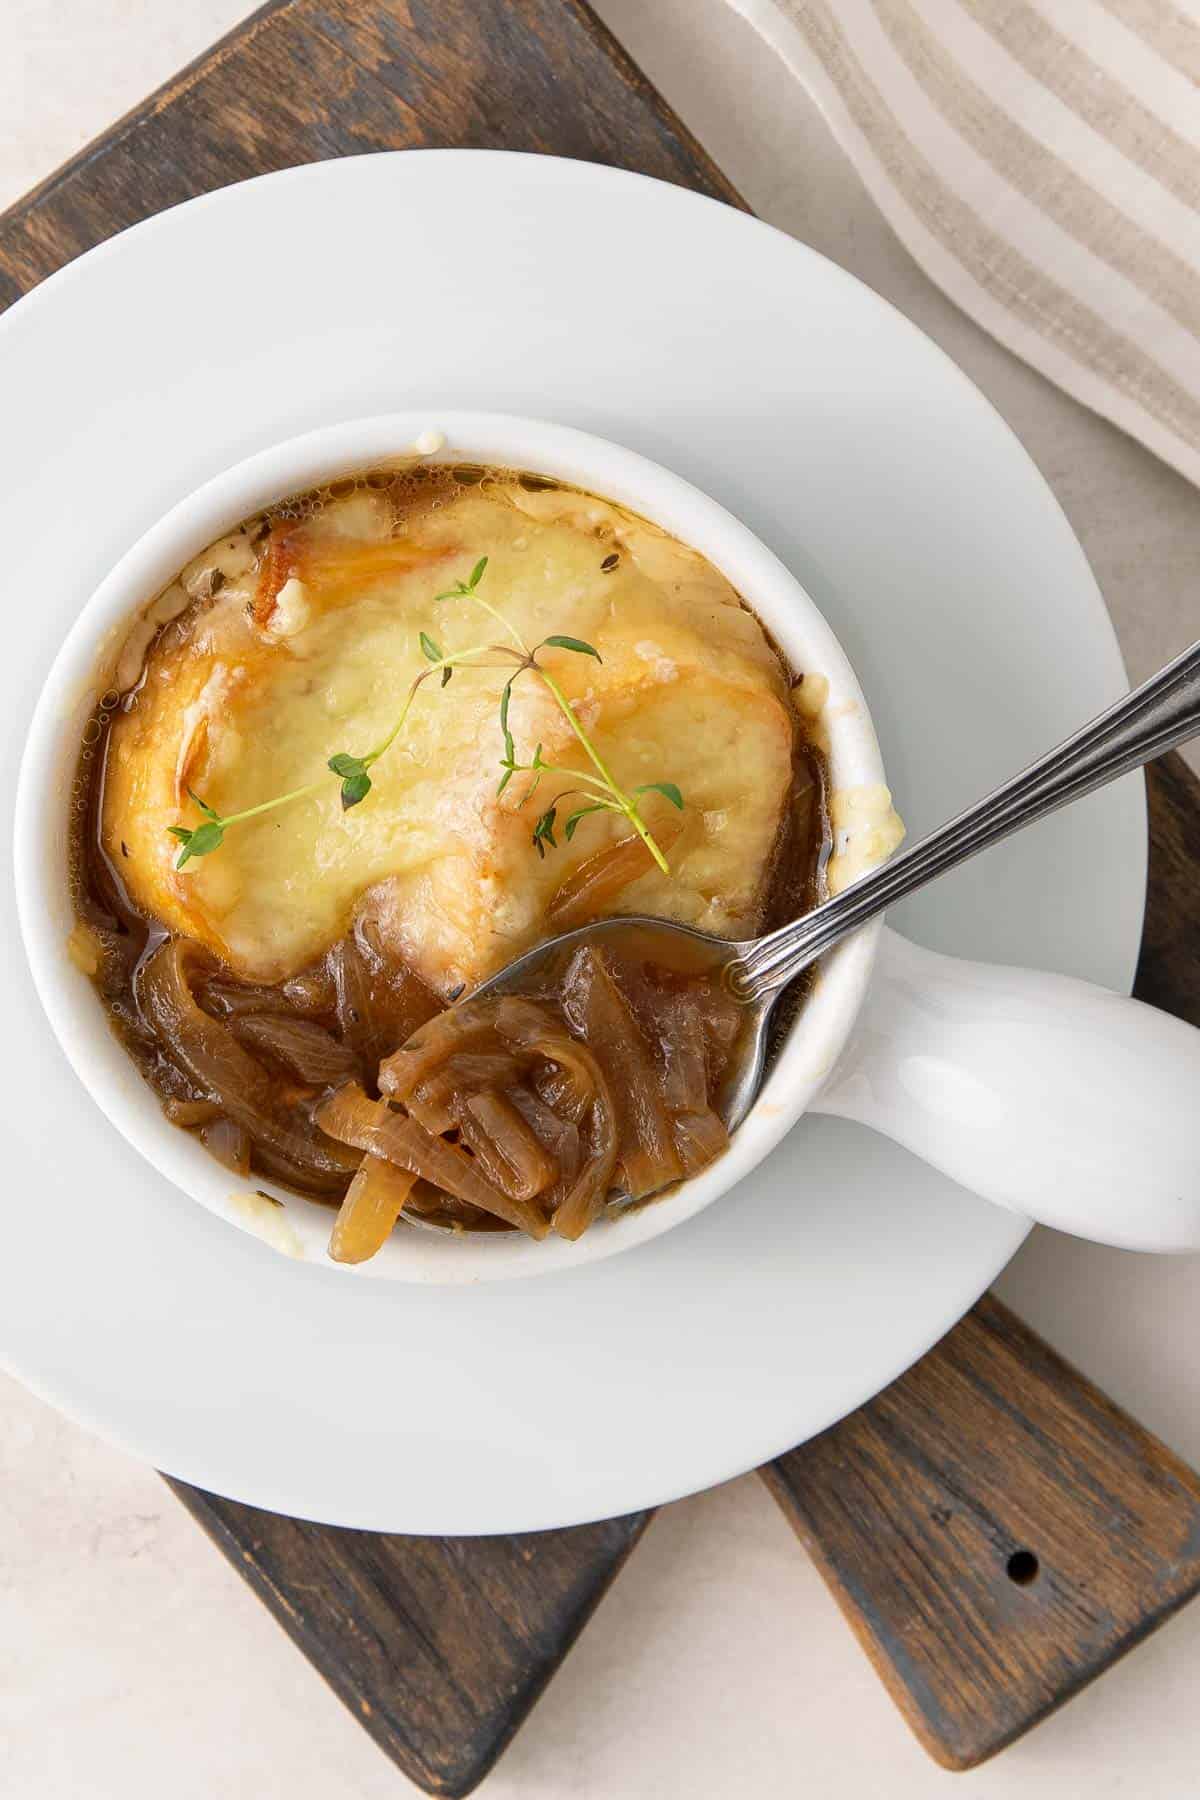 Overhead view of a spoon in a bowl of French onion soup.